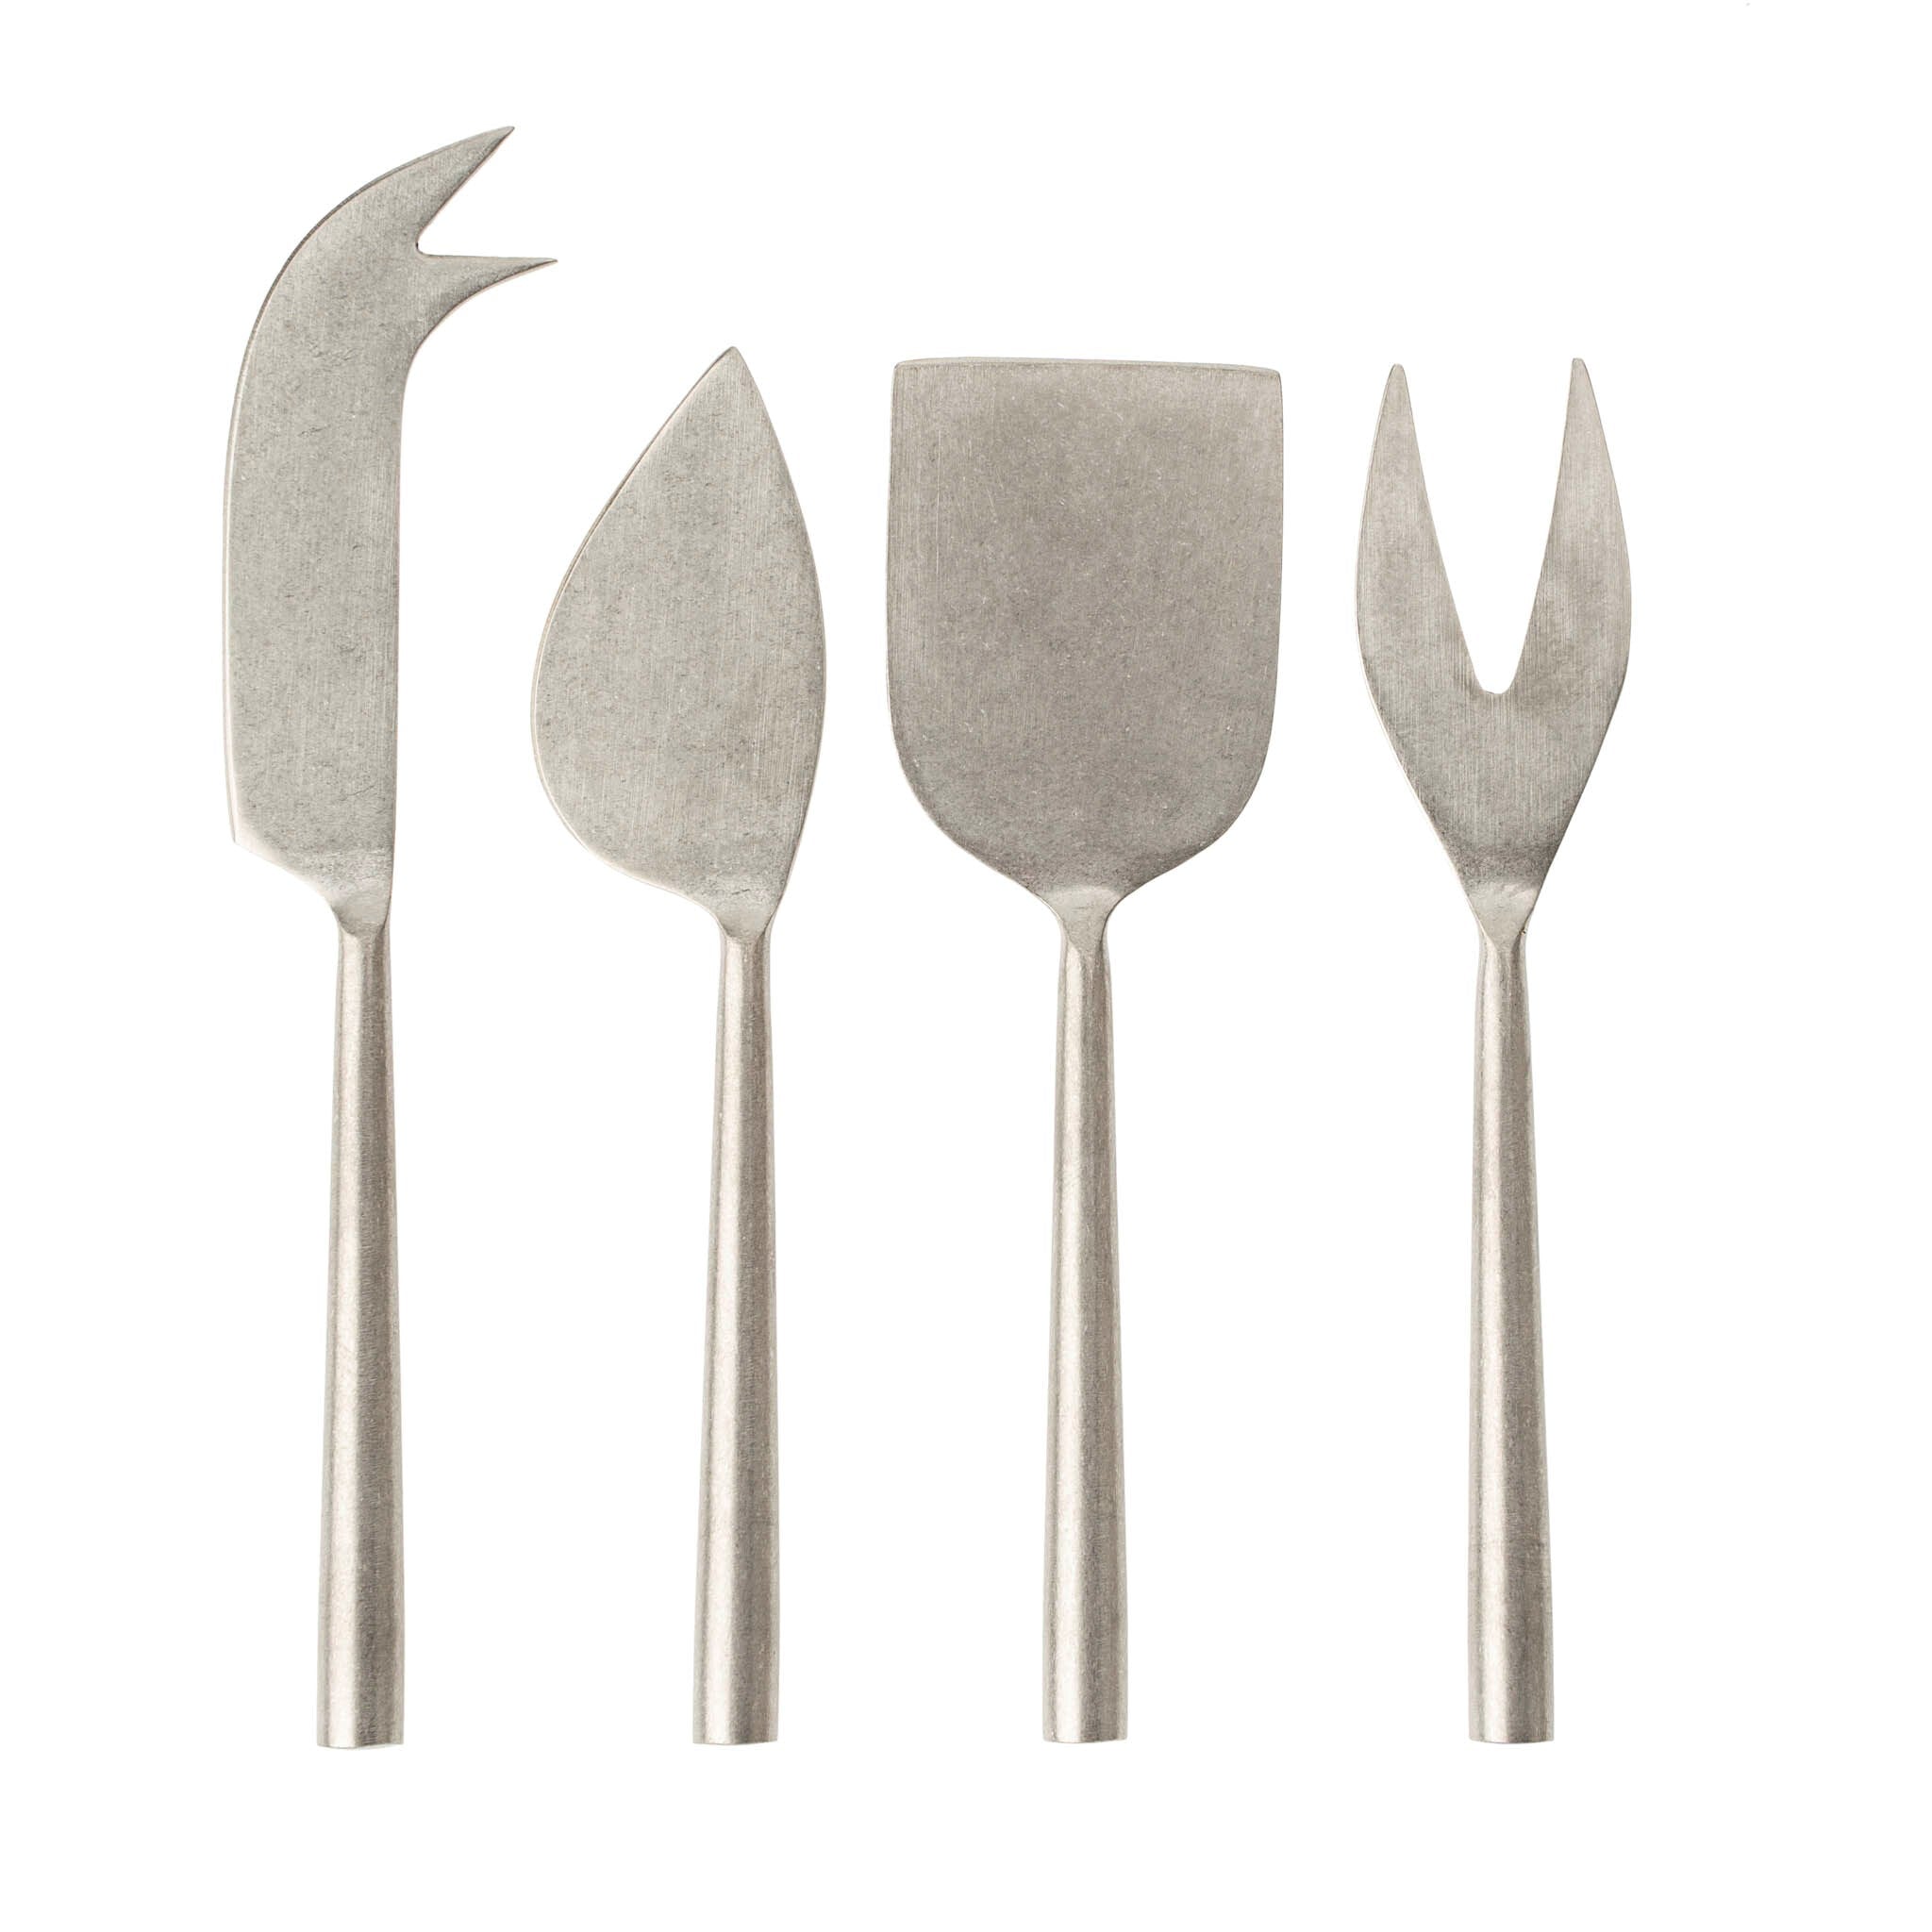 Tides Cheese Knives